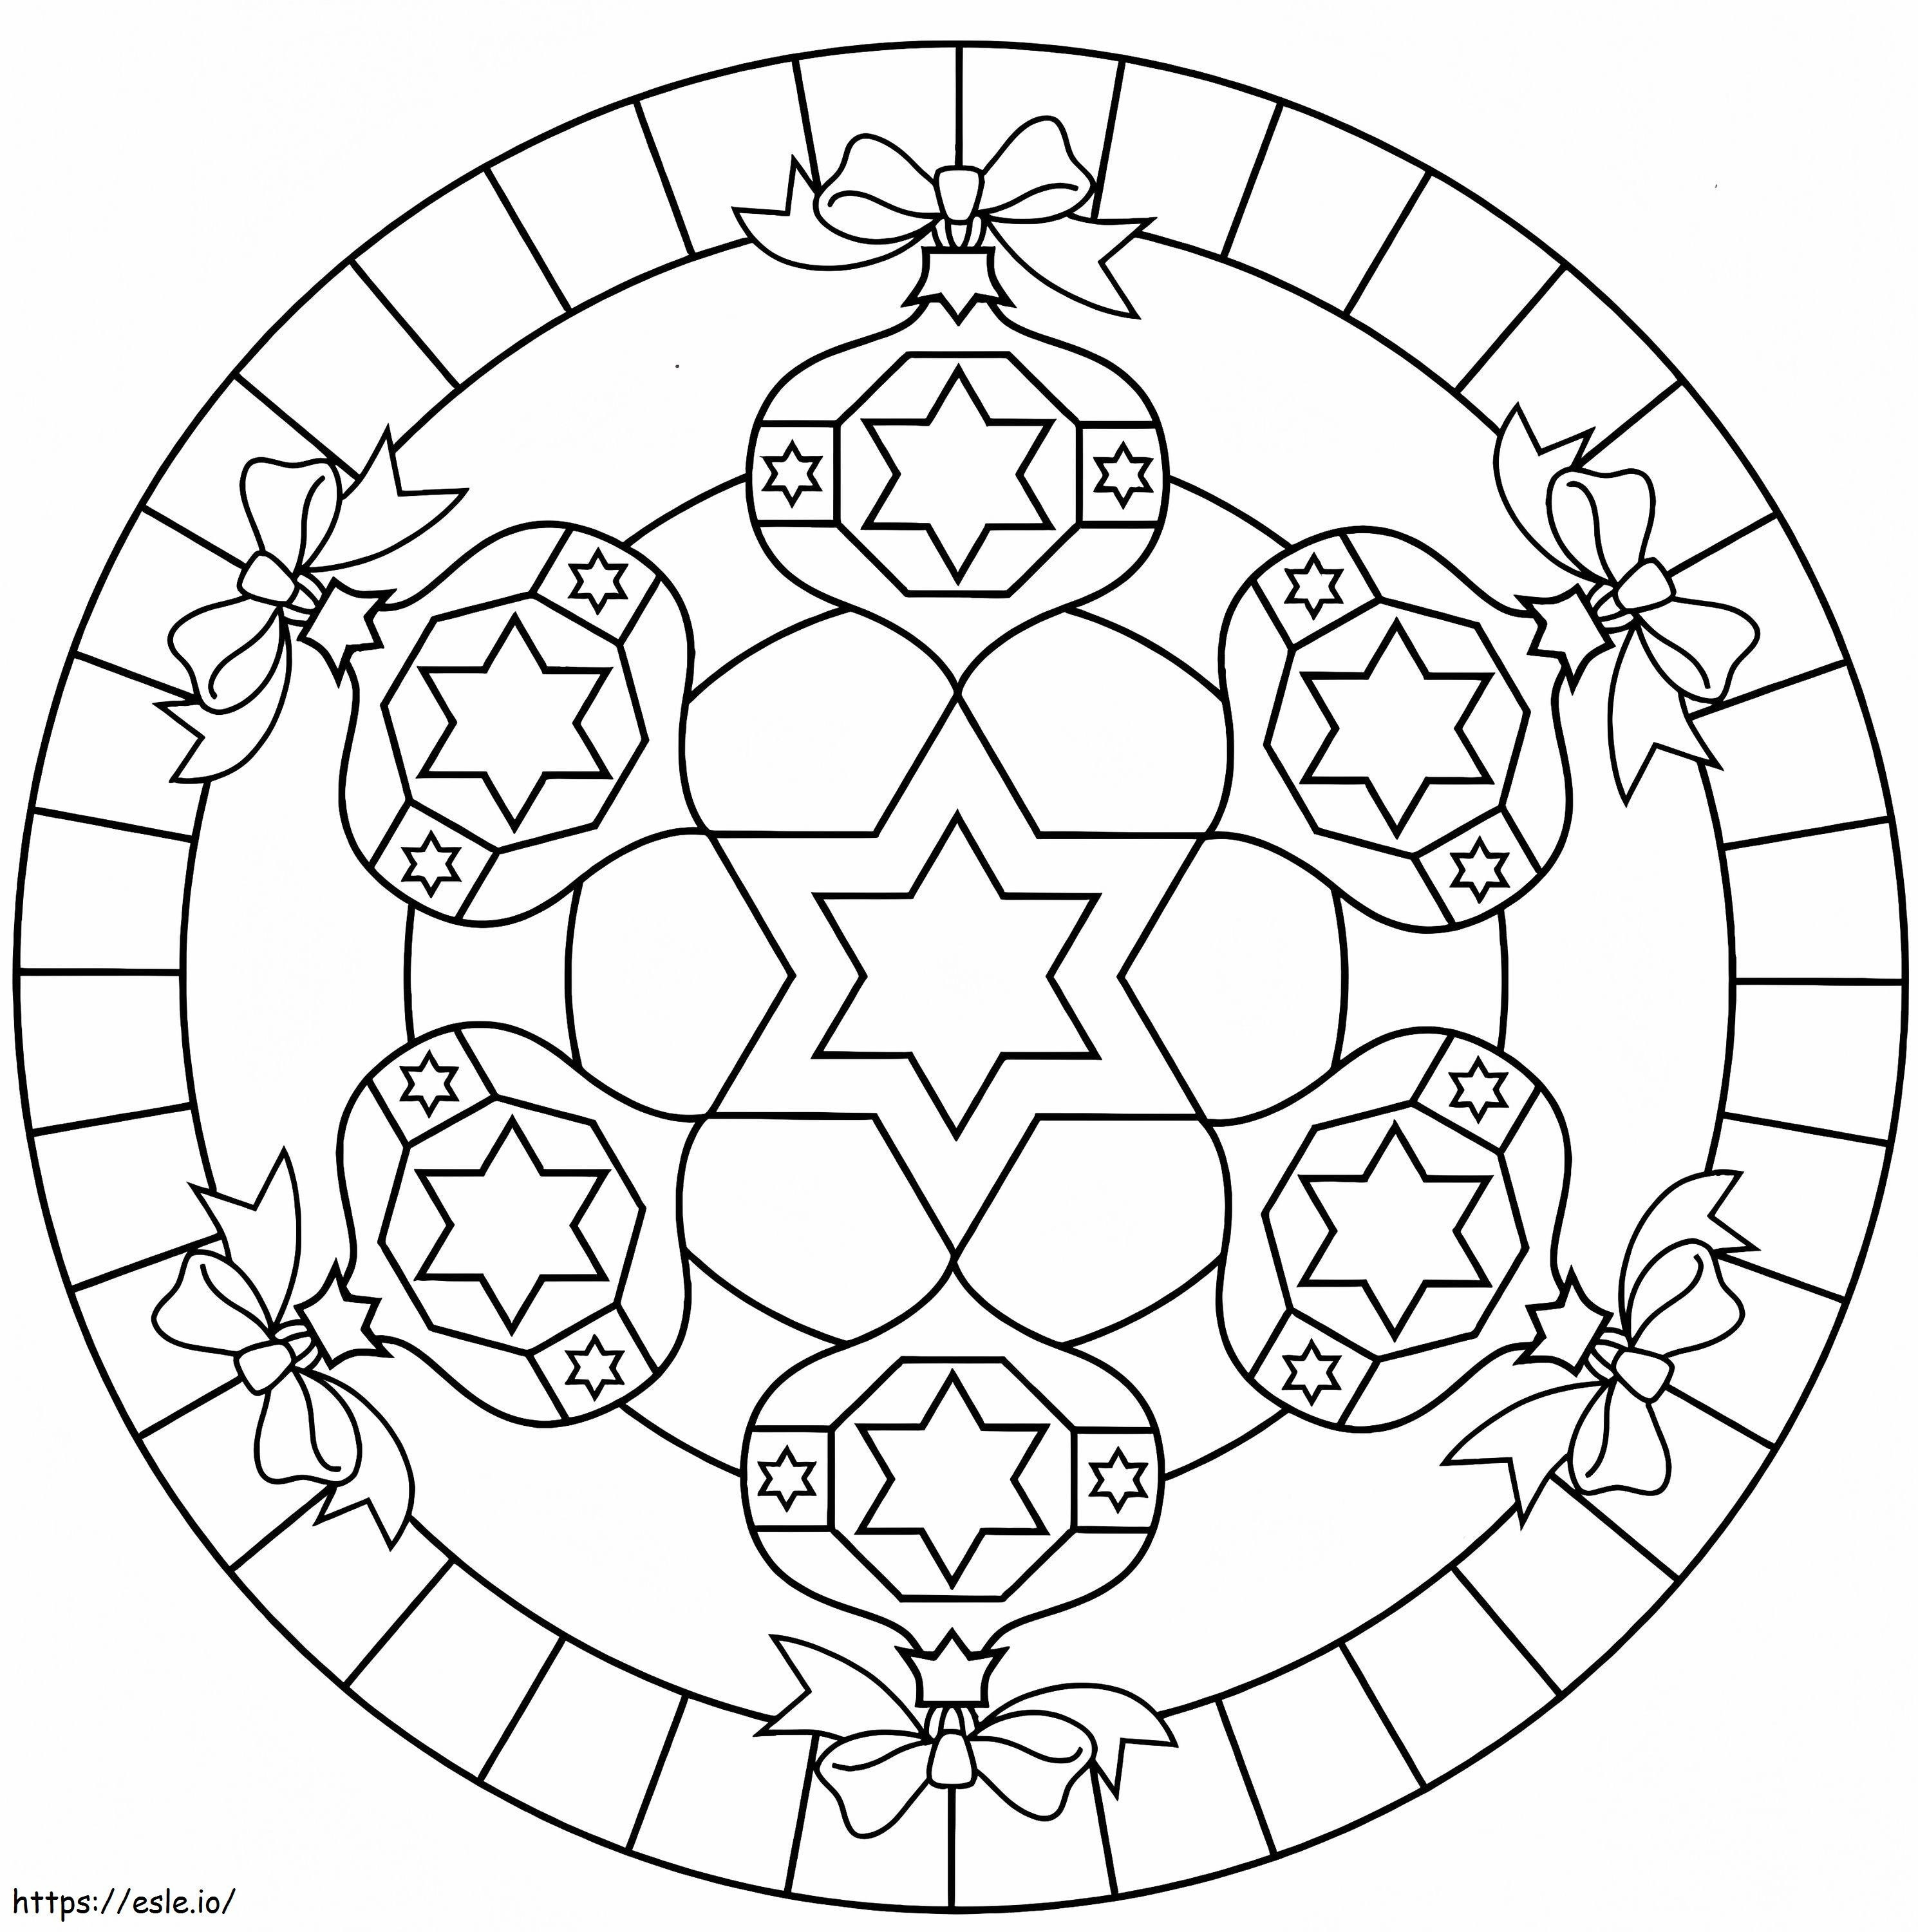 Mandala With Hexagrams coloring page